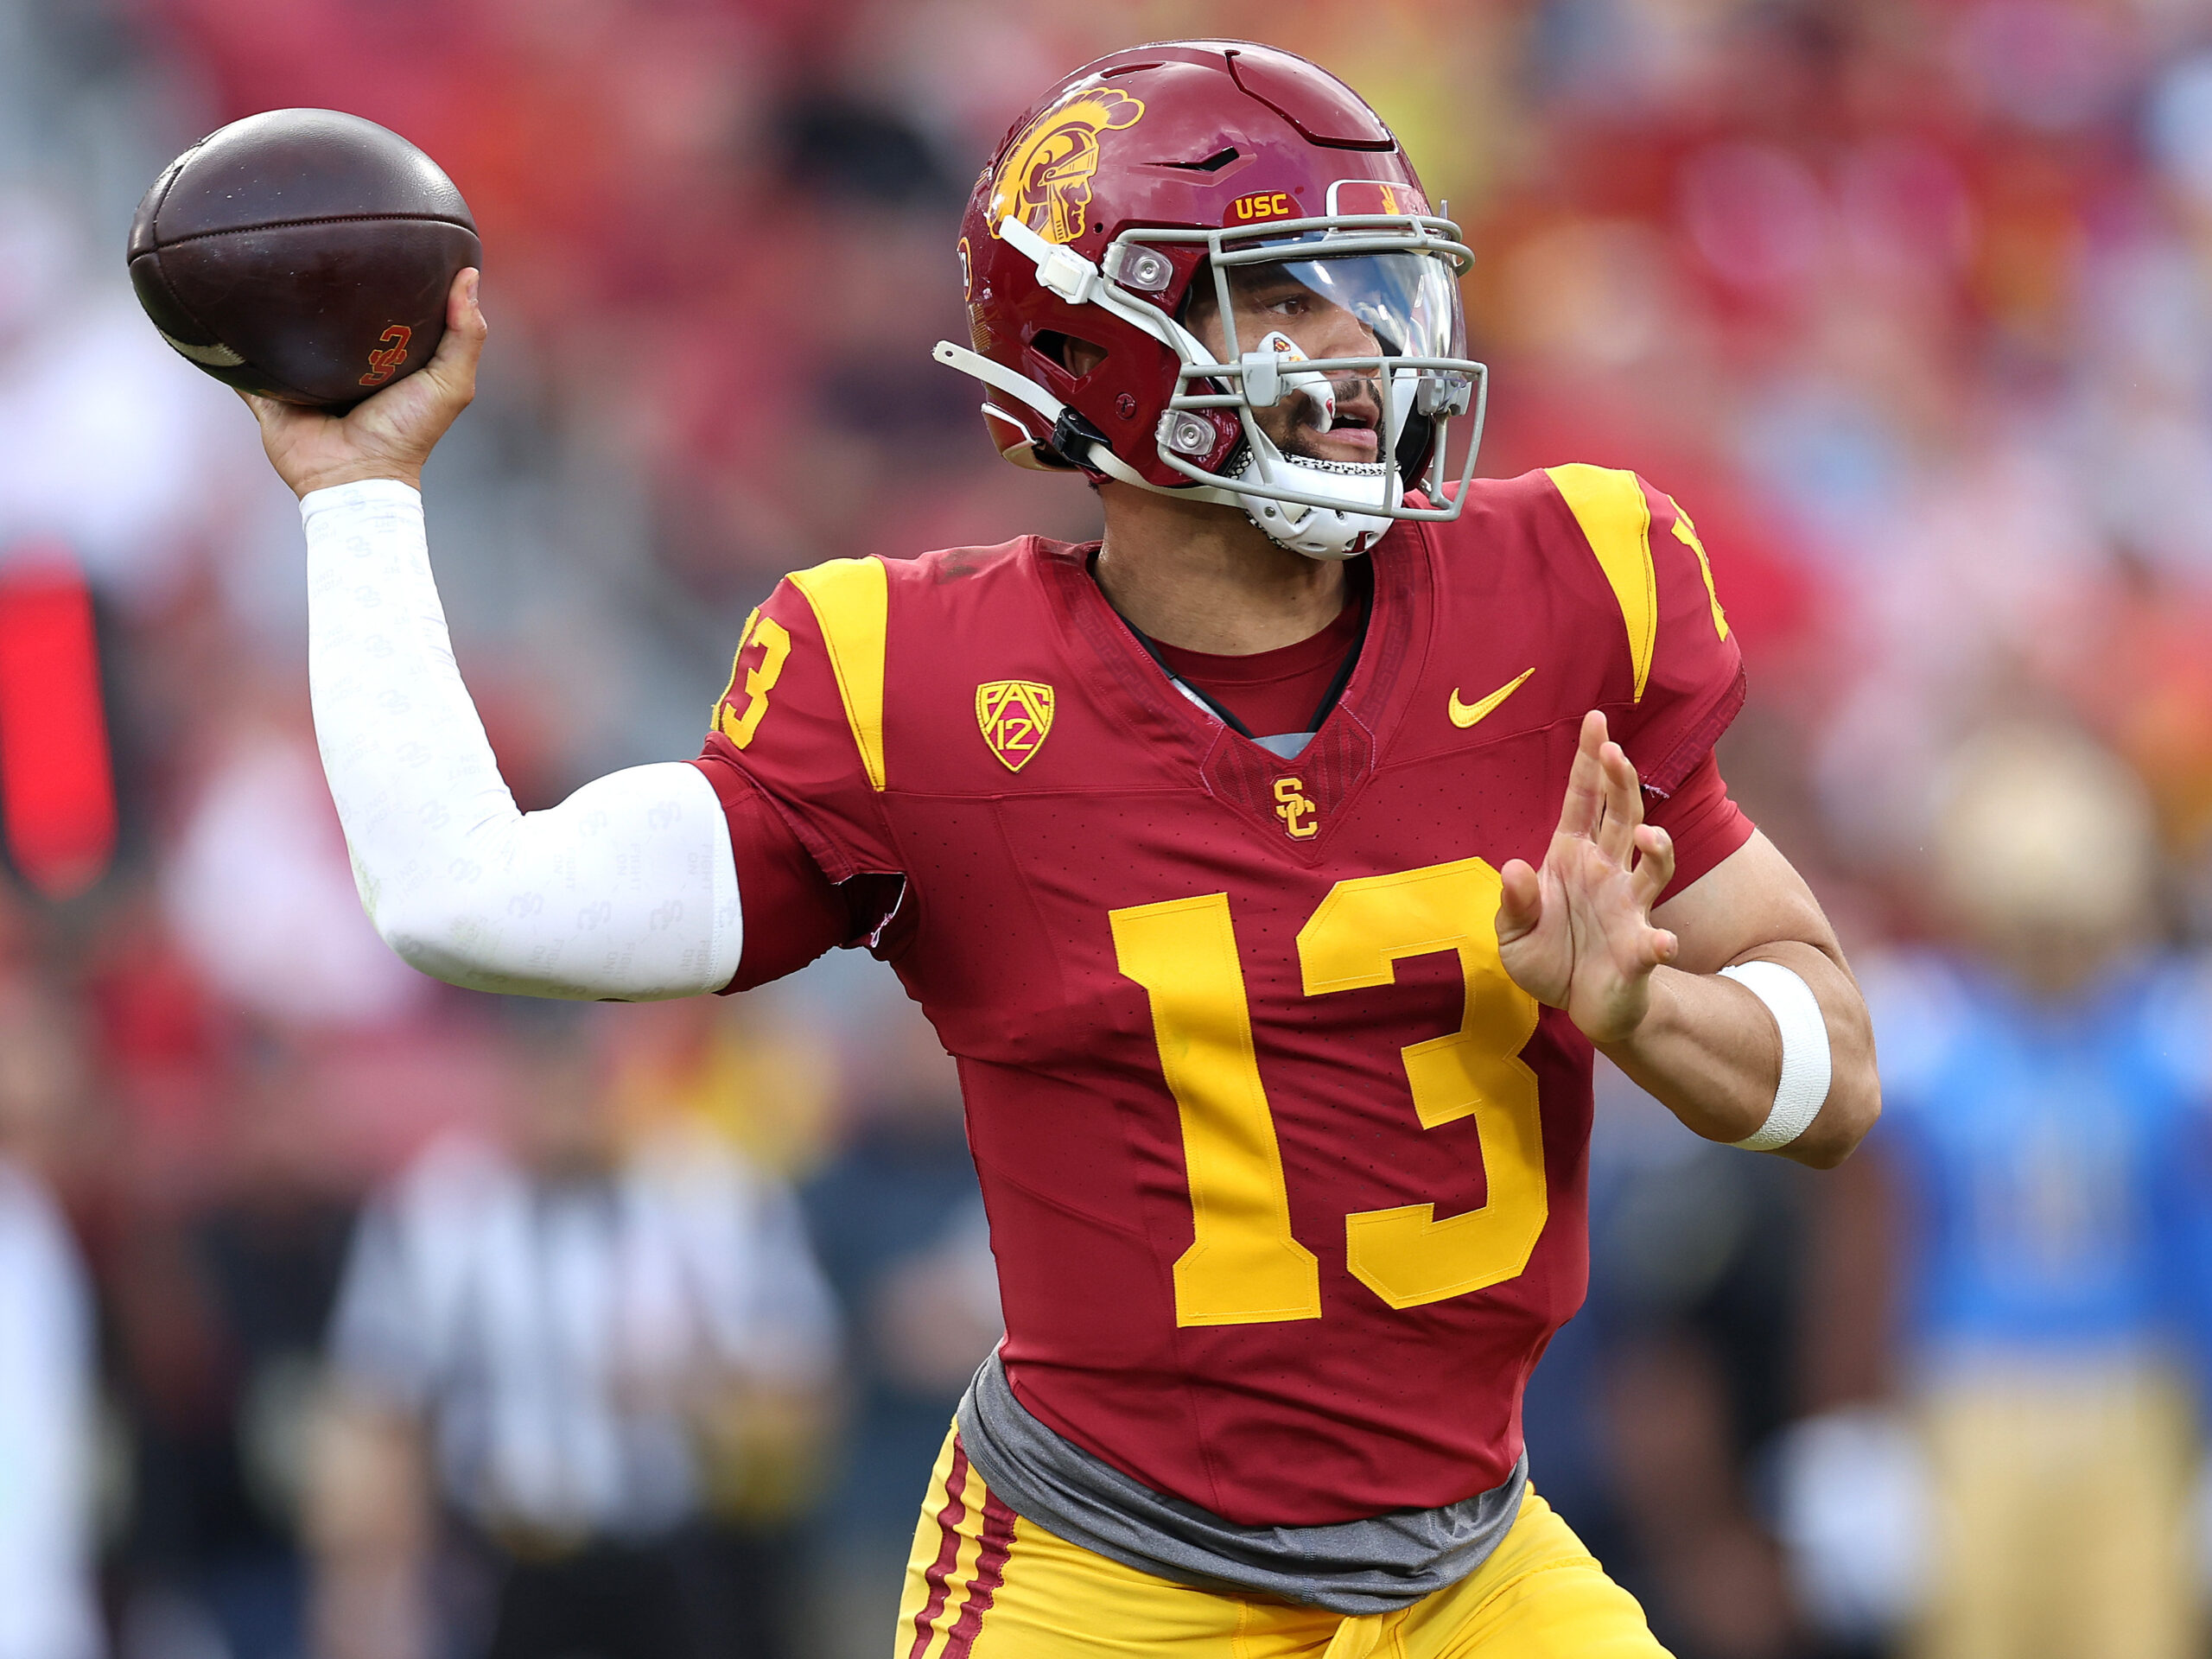 University of Southern California quarterback Caleb Williams is expected to be the number one pick in Thursday's NFL draft. His stellar on-field performances can be traced to one play as a nine-year-old.